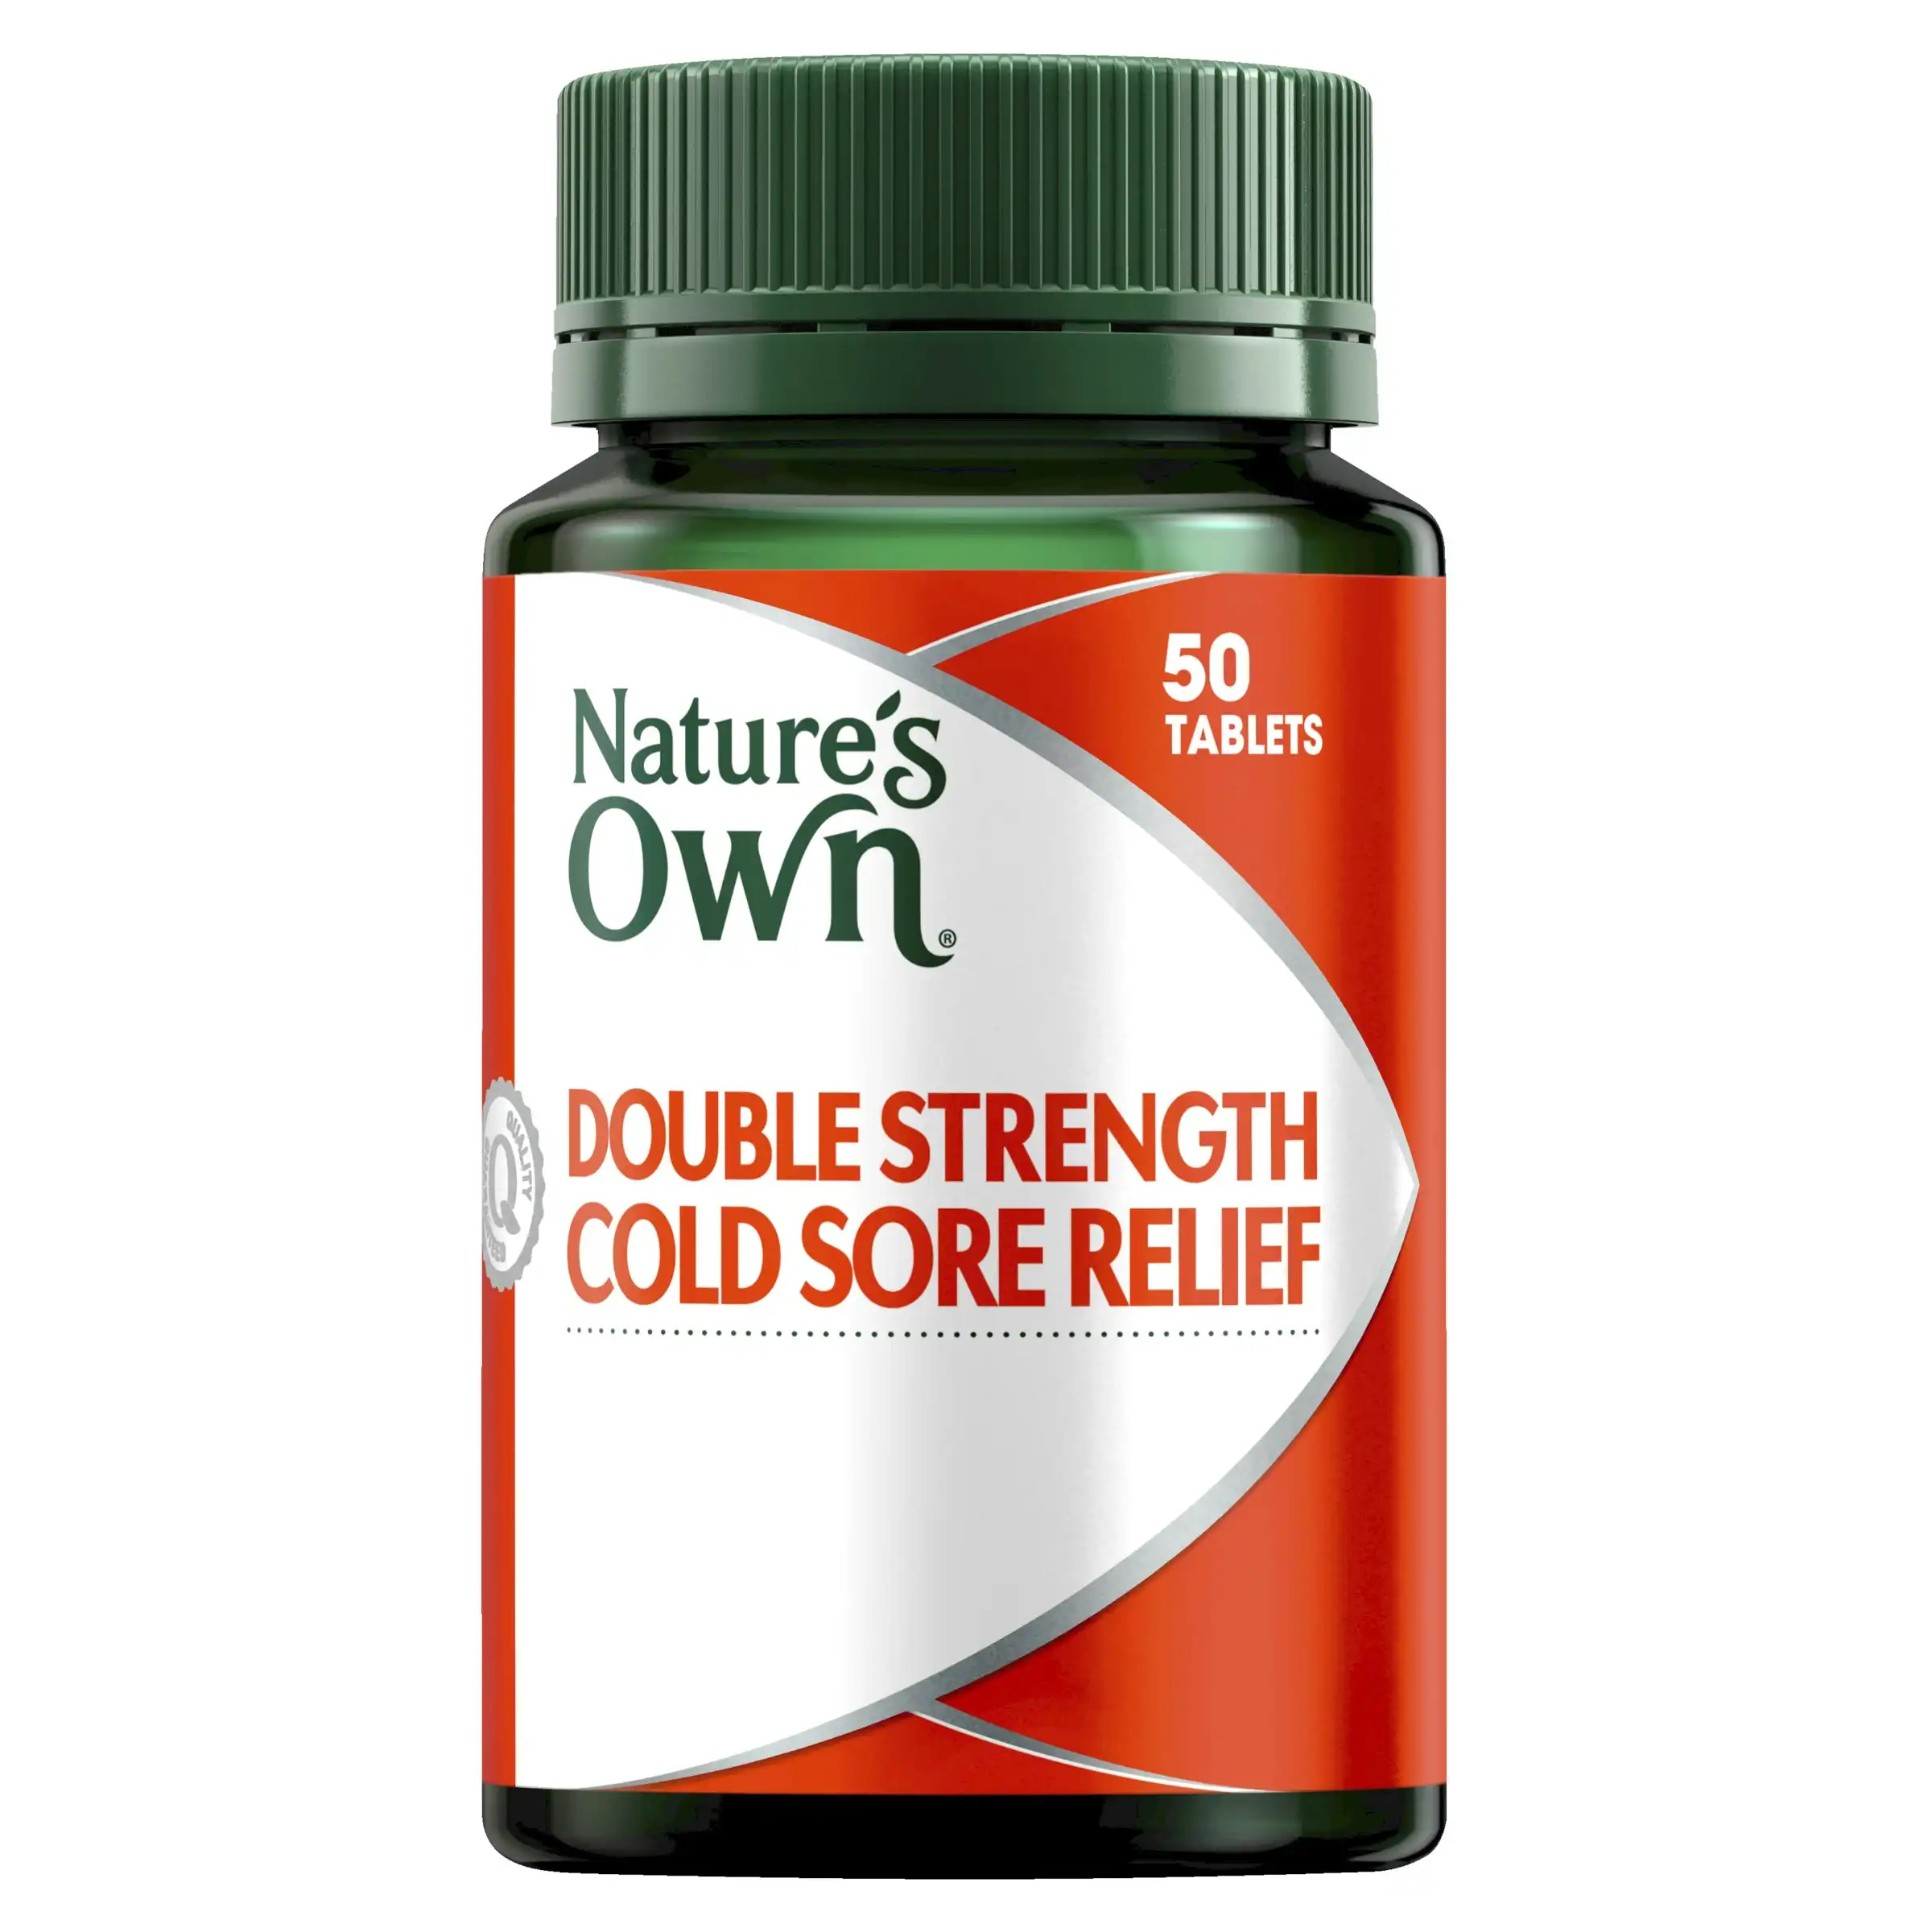 Natures Own Double Strength Cold Sore Relief 50 Tabs